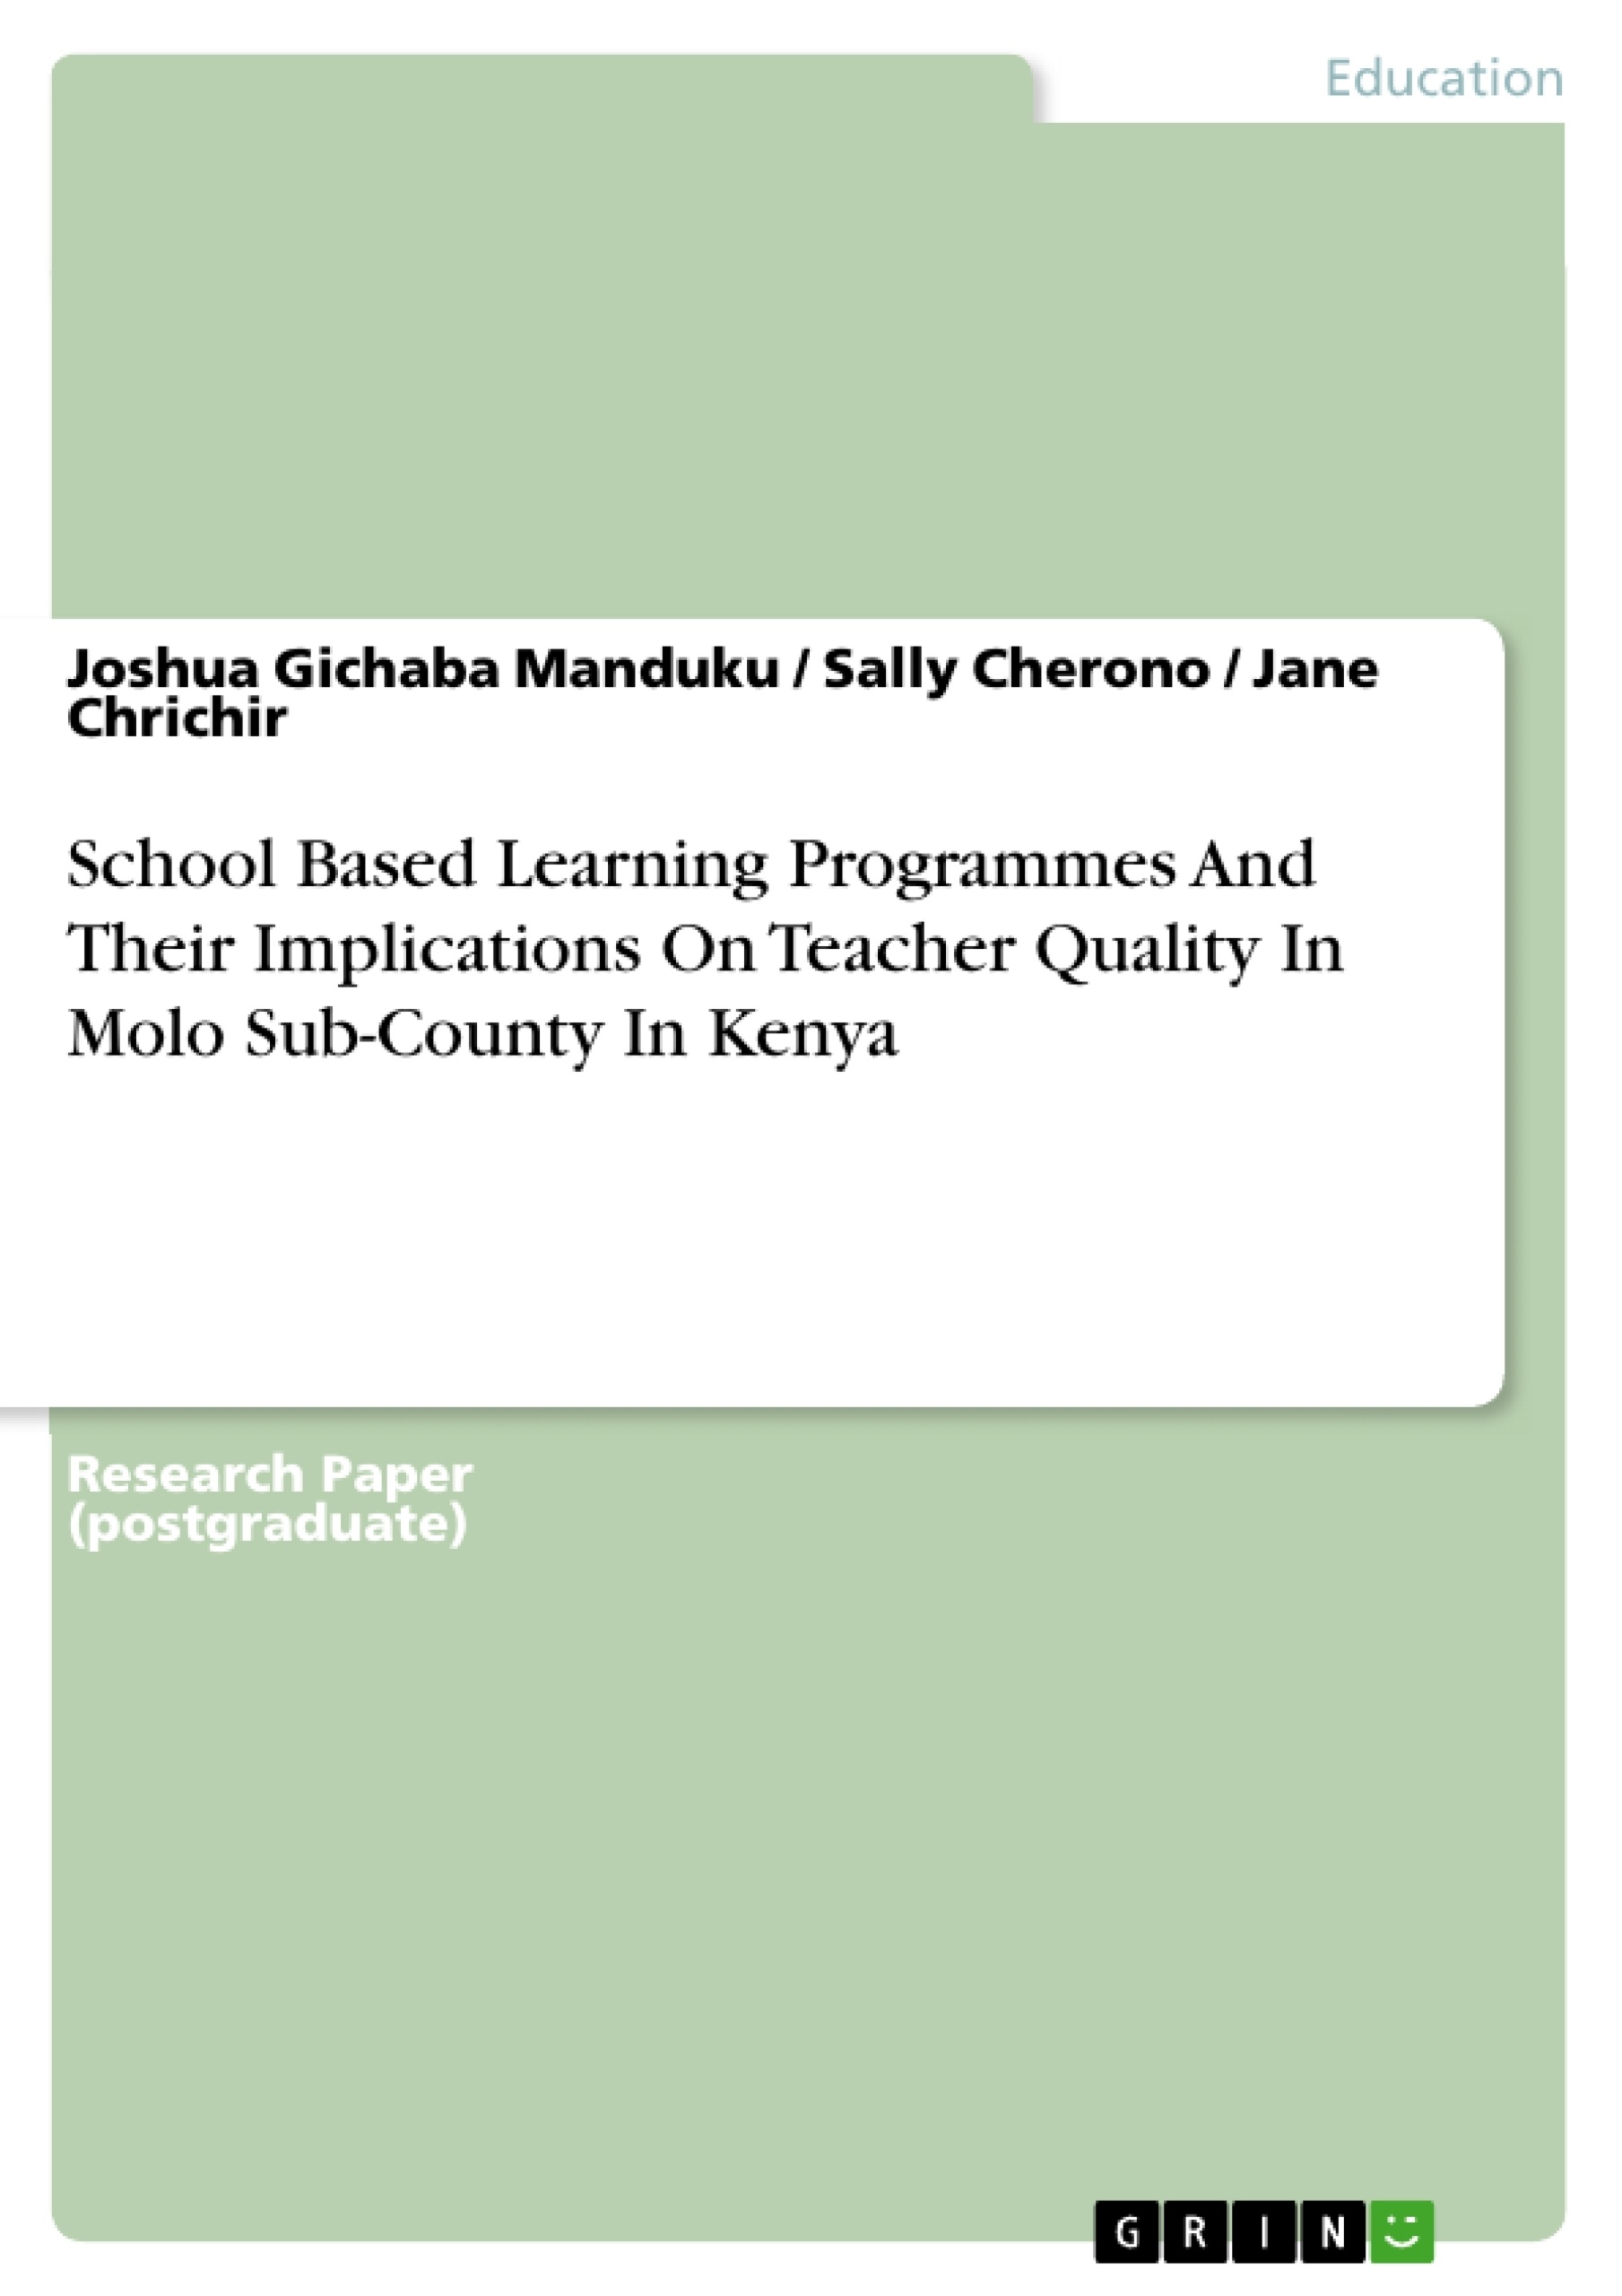 Título: School Based Learning Programmes And Their Implications On Teacher Quality In Molo Sub-County In Kenya